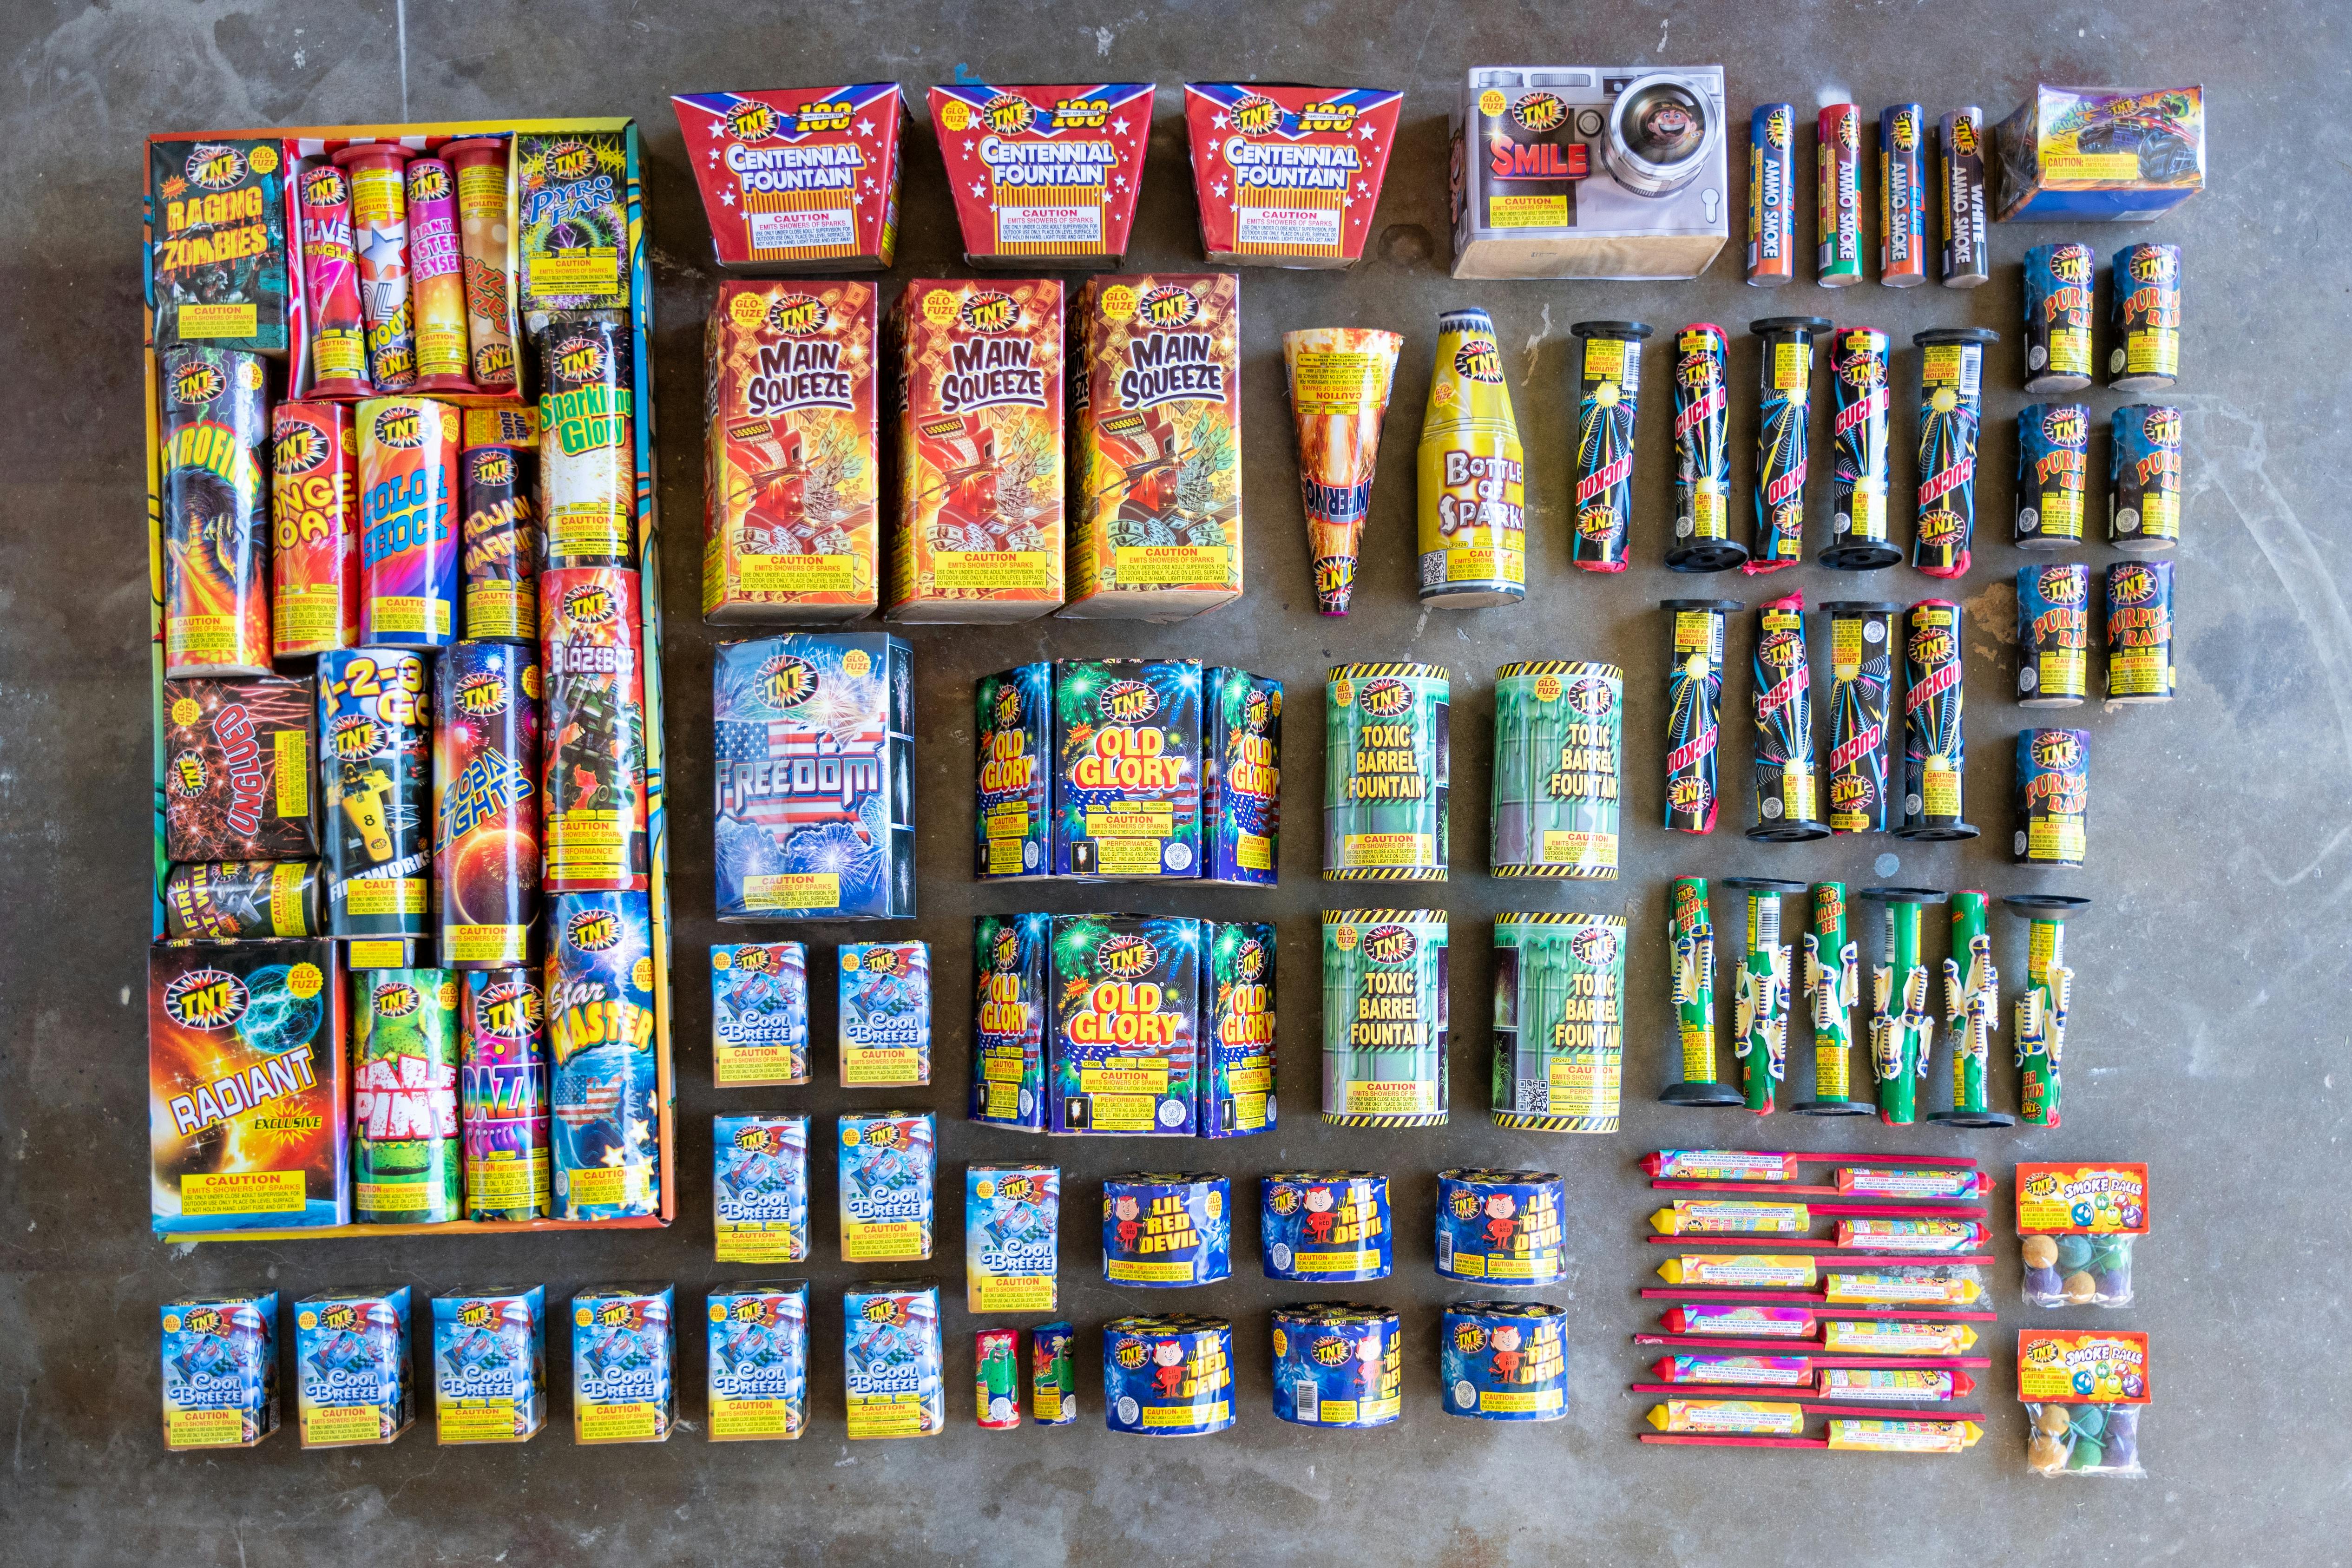 Different kinds of fireworks organized into a display on the ground.